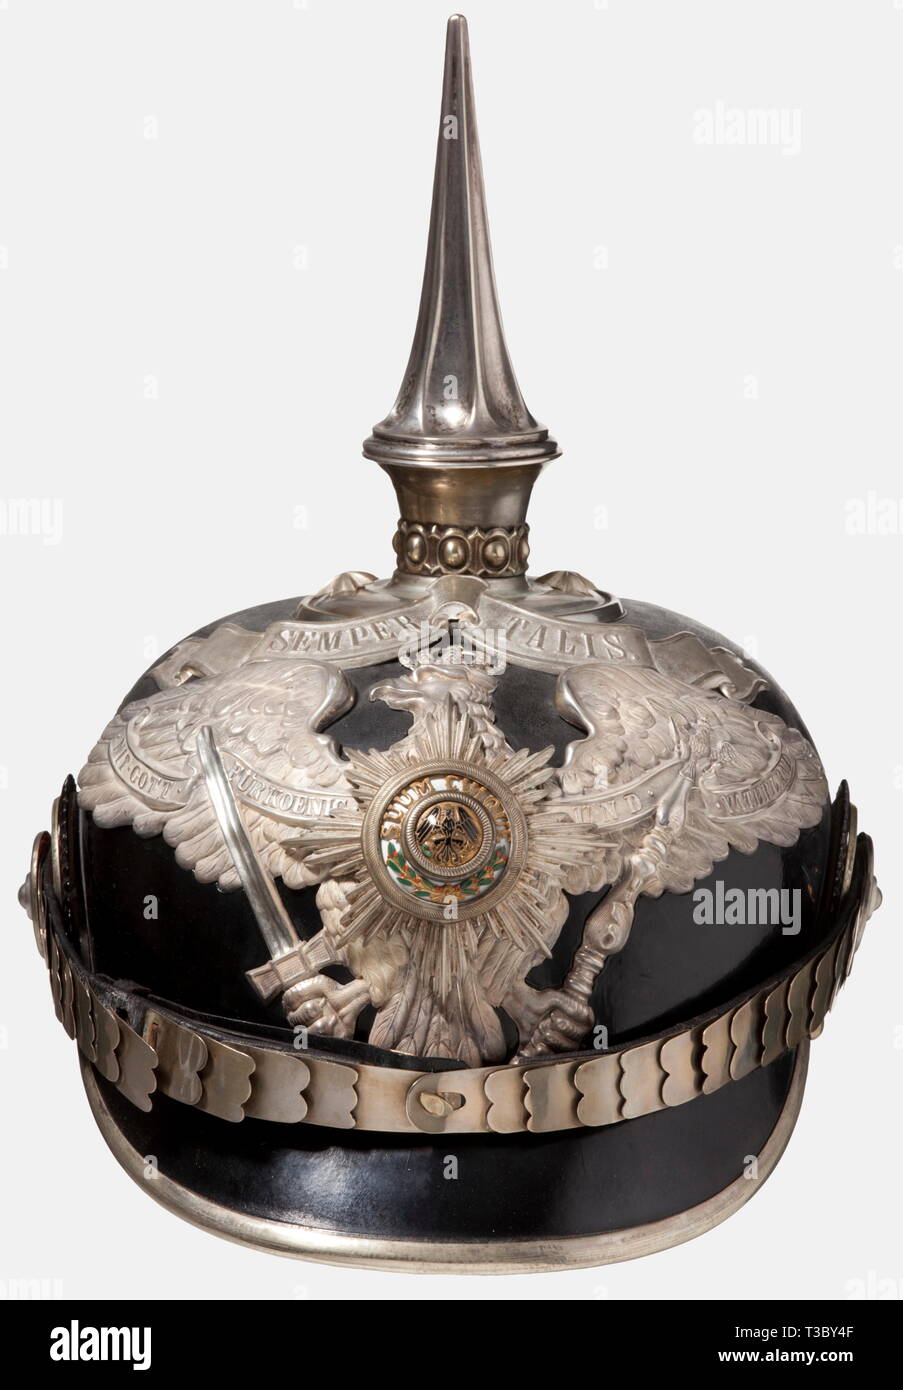 A helmet for officers of the 1st Foot Guards Regiment, Potsdam, circa 1910 A tall officer's helmet in the rare version with the 'SEMPER TALIS' scroll awarded to the 1st Battalion and the regimental staff on 27 January 1889. Black lacquered leather body. Partially frosted and polished silver-plated mountings. Circular crown plate with a fluted spike. Guards eagle with a strongly cambered, enamelled guard star. Silver-plated flat metal chinscales on silver-plated rosettes. Both cockades. Light-coloured sweatband and ribbed silk lining (loose in bac, Additional-Rights-Clearance-Info-Not-Available Stock Photo